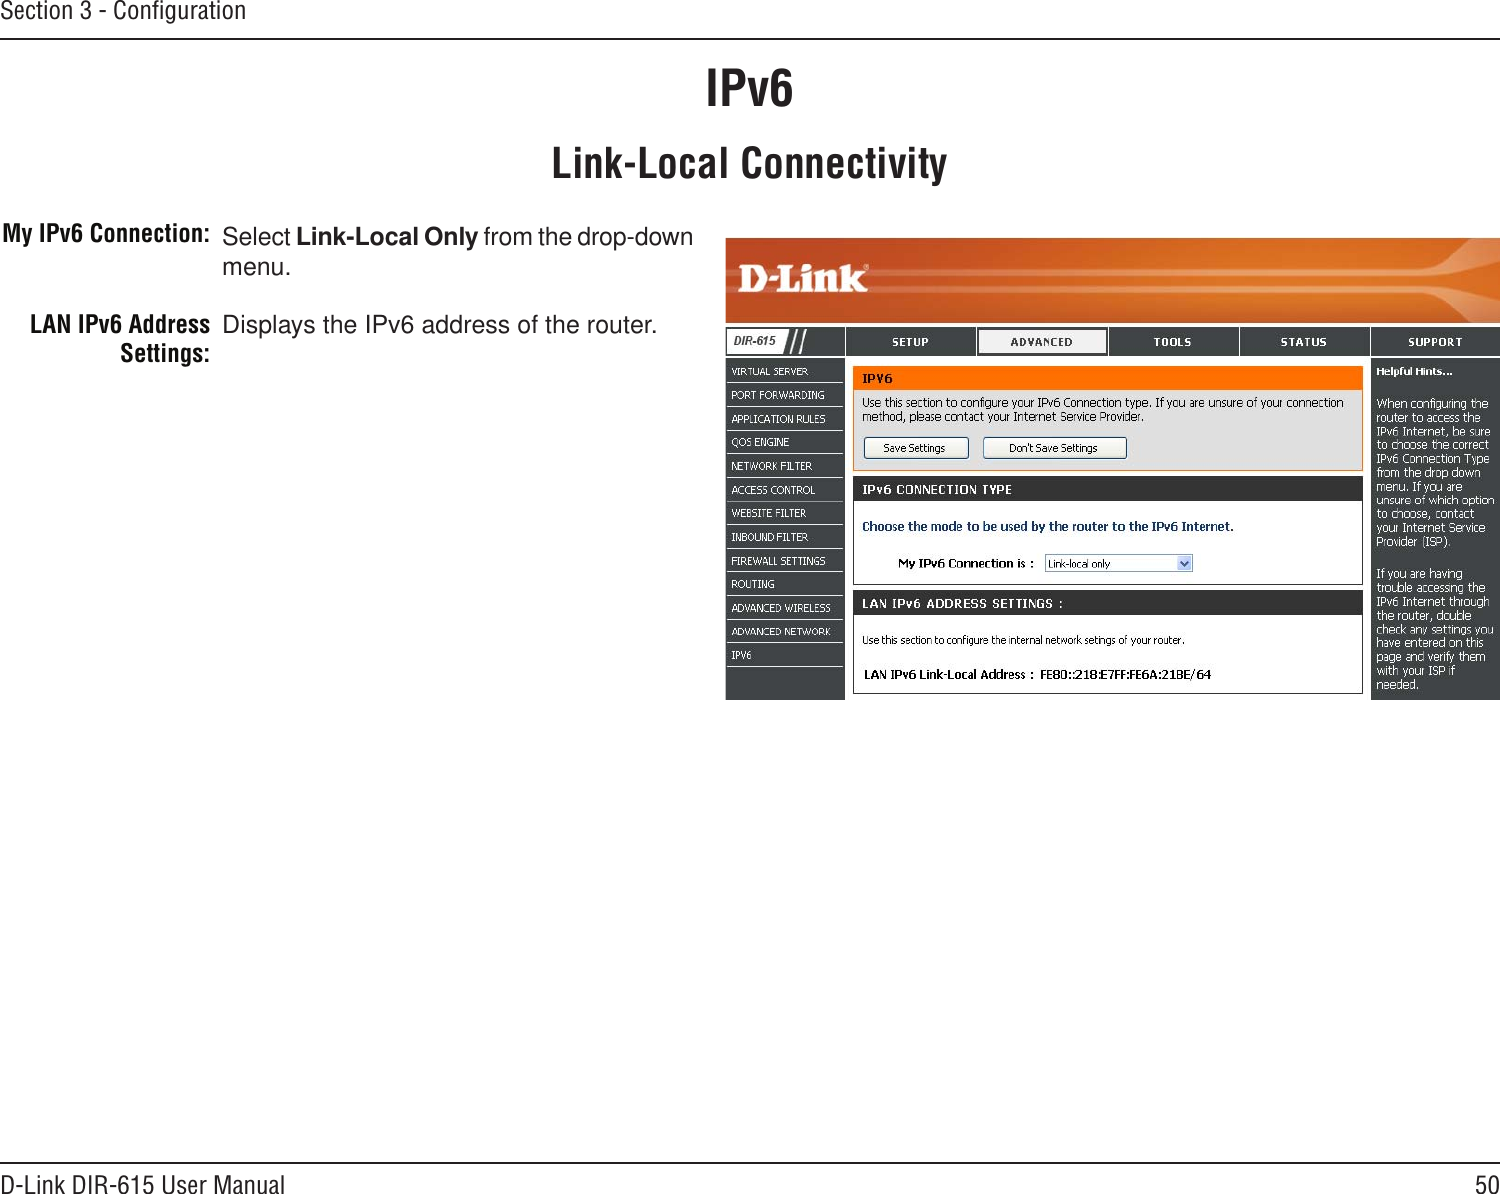 50D-Link DIR-615 User ManualSection 3 - ConﬁgurationIPv6Select Link-Local Only from the drop-down menu.Displays the IPv6 address of the router.My IPv6 Connection:LAN IPv6 Address Settings:Link-Local Connectivity